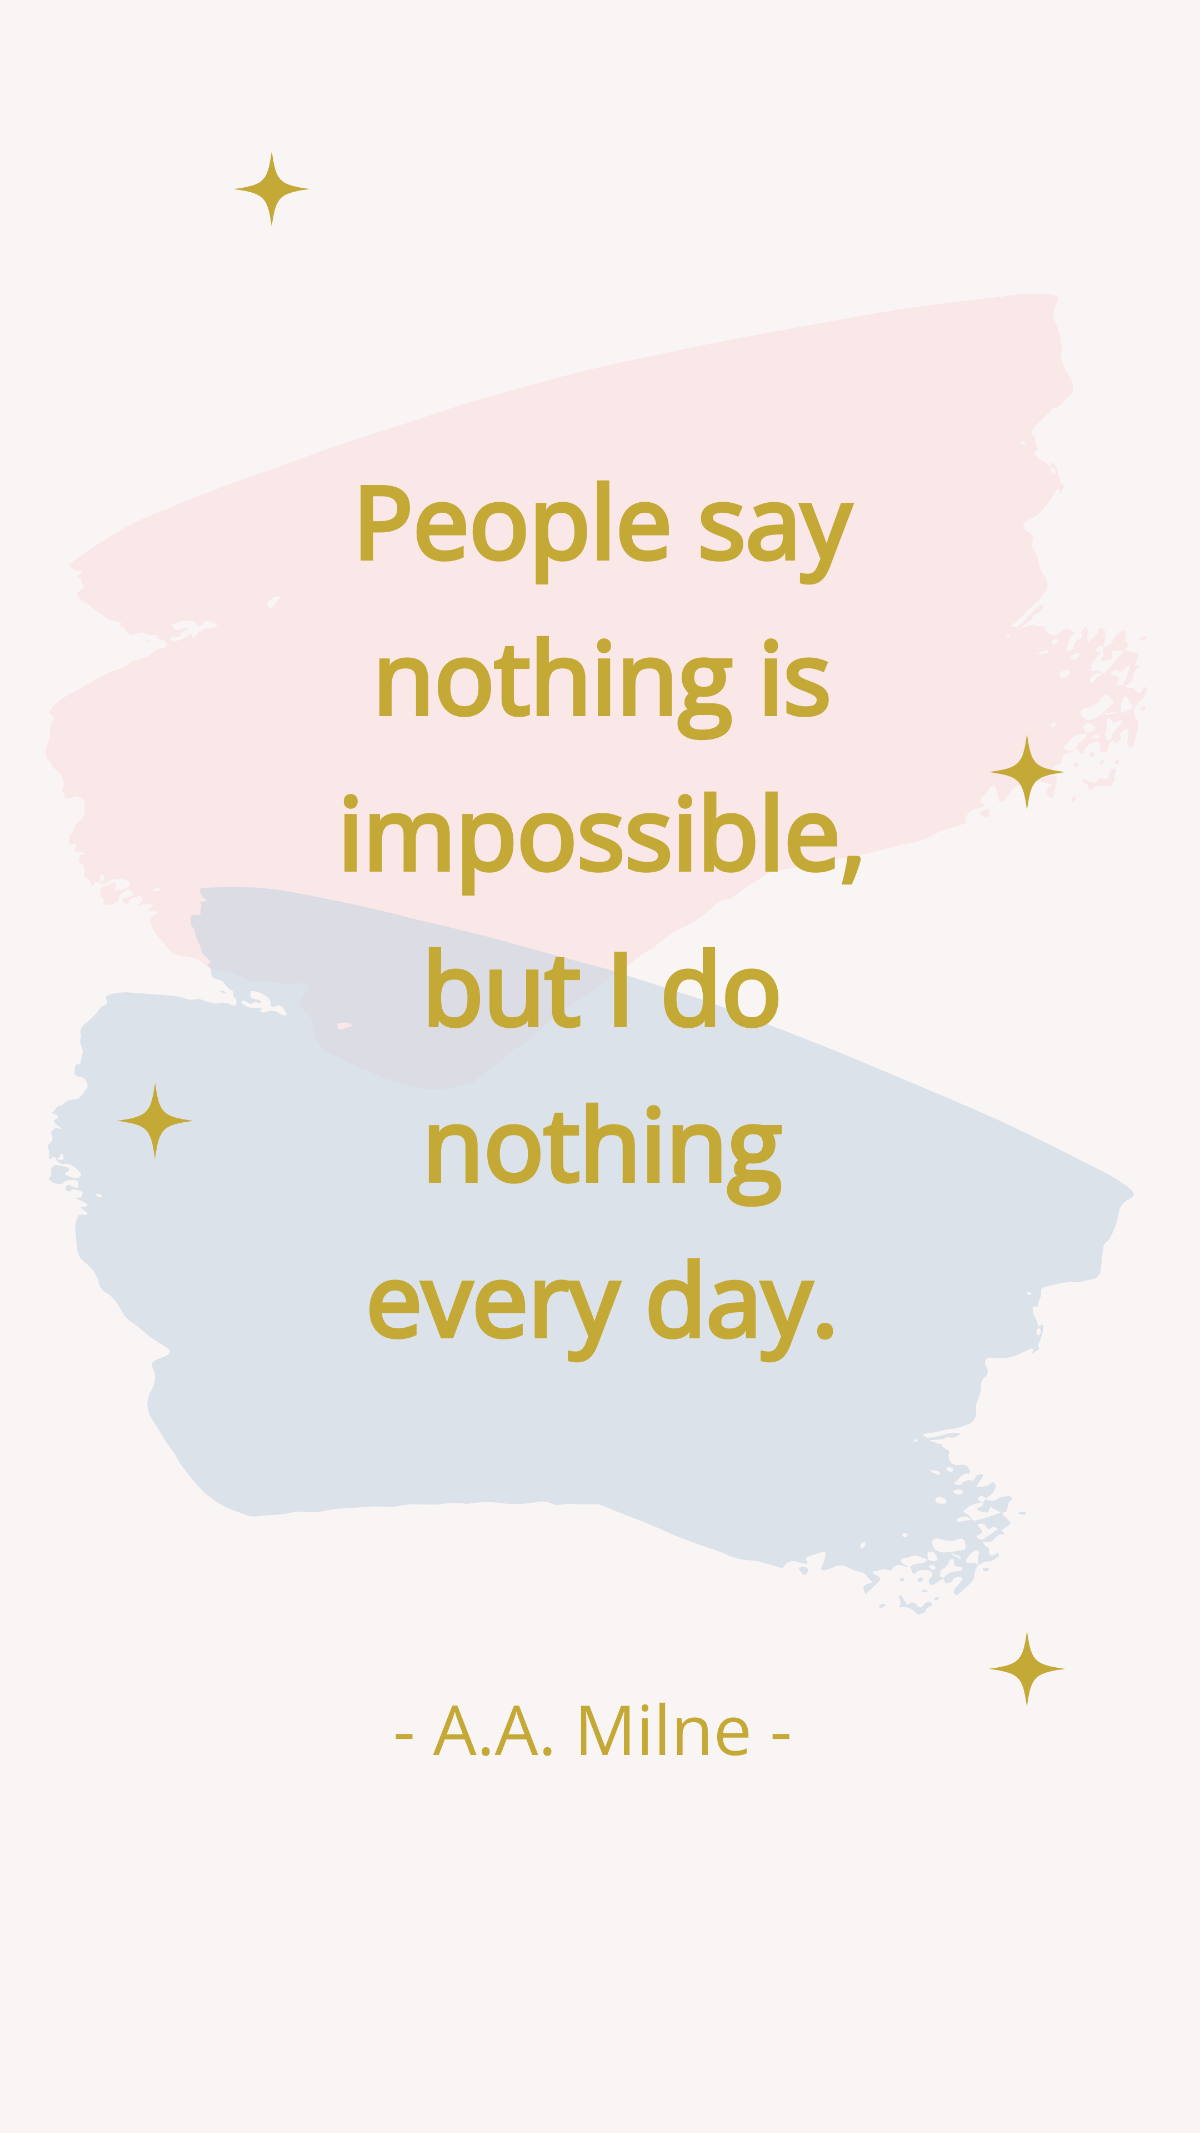 A.A. Milne - People say nothing is impossible, but I do nothing every day. Template